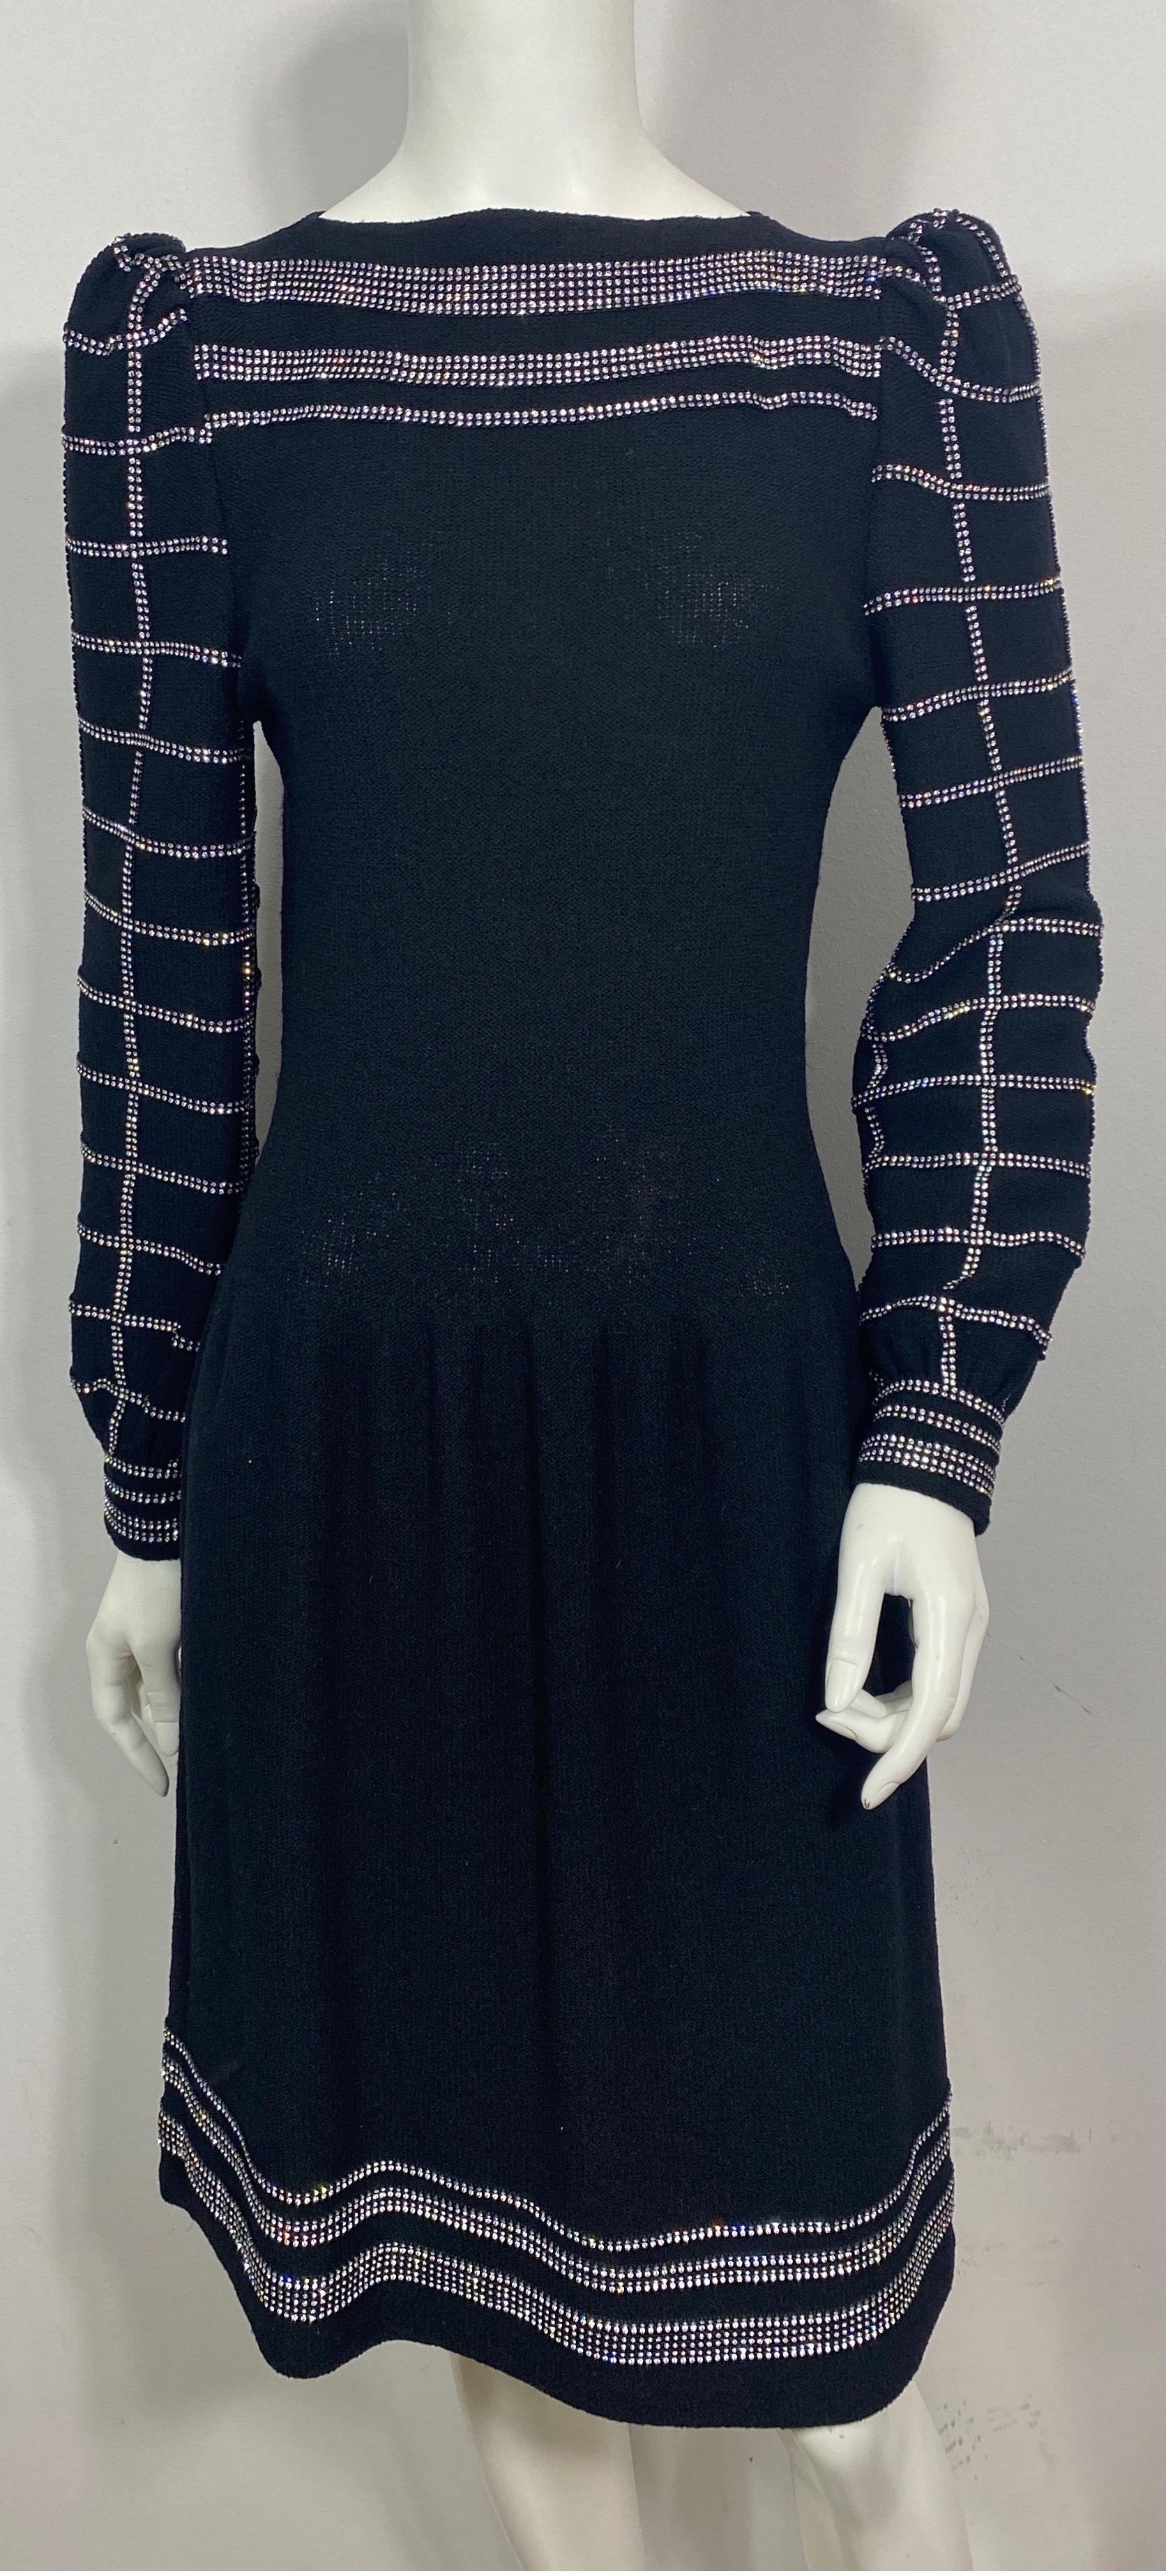 Adolfo 1980’s Black Wool Knit Rhinestone Embellished Dress- Size 6  This 1980’s fantastic Adolfo creation is in a black wool knit, Bateau neckline with 12 rows of horizontal rhinestones along the front, bottom/hemline of dress and the cuffs on the